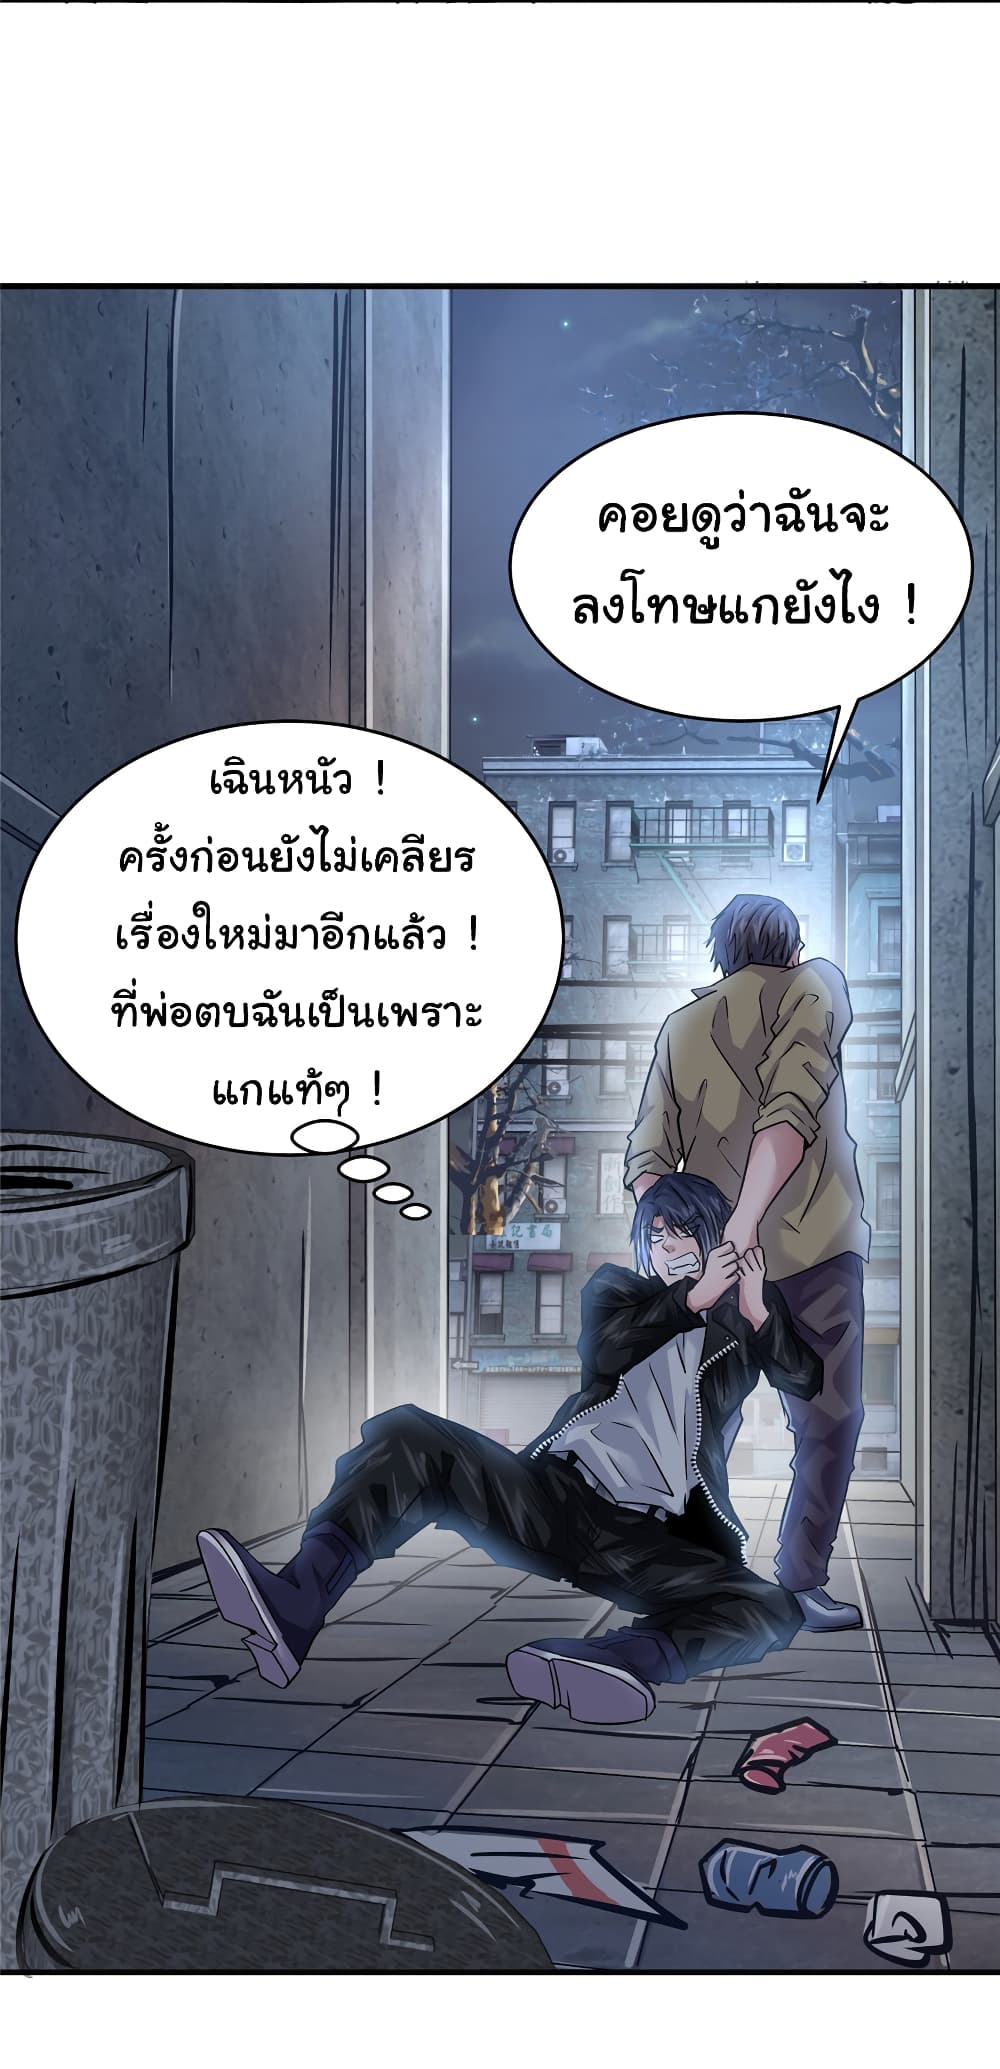 Live Steadily, Donโ€t Wave เธ•เธญเธเธ—เธตเน 41 (10)